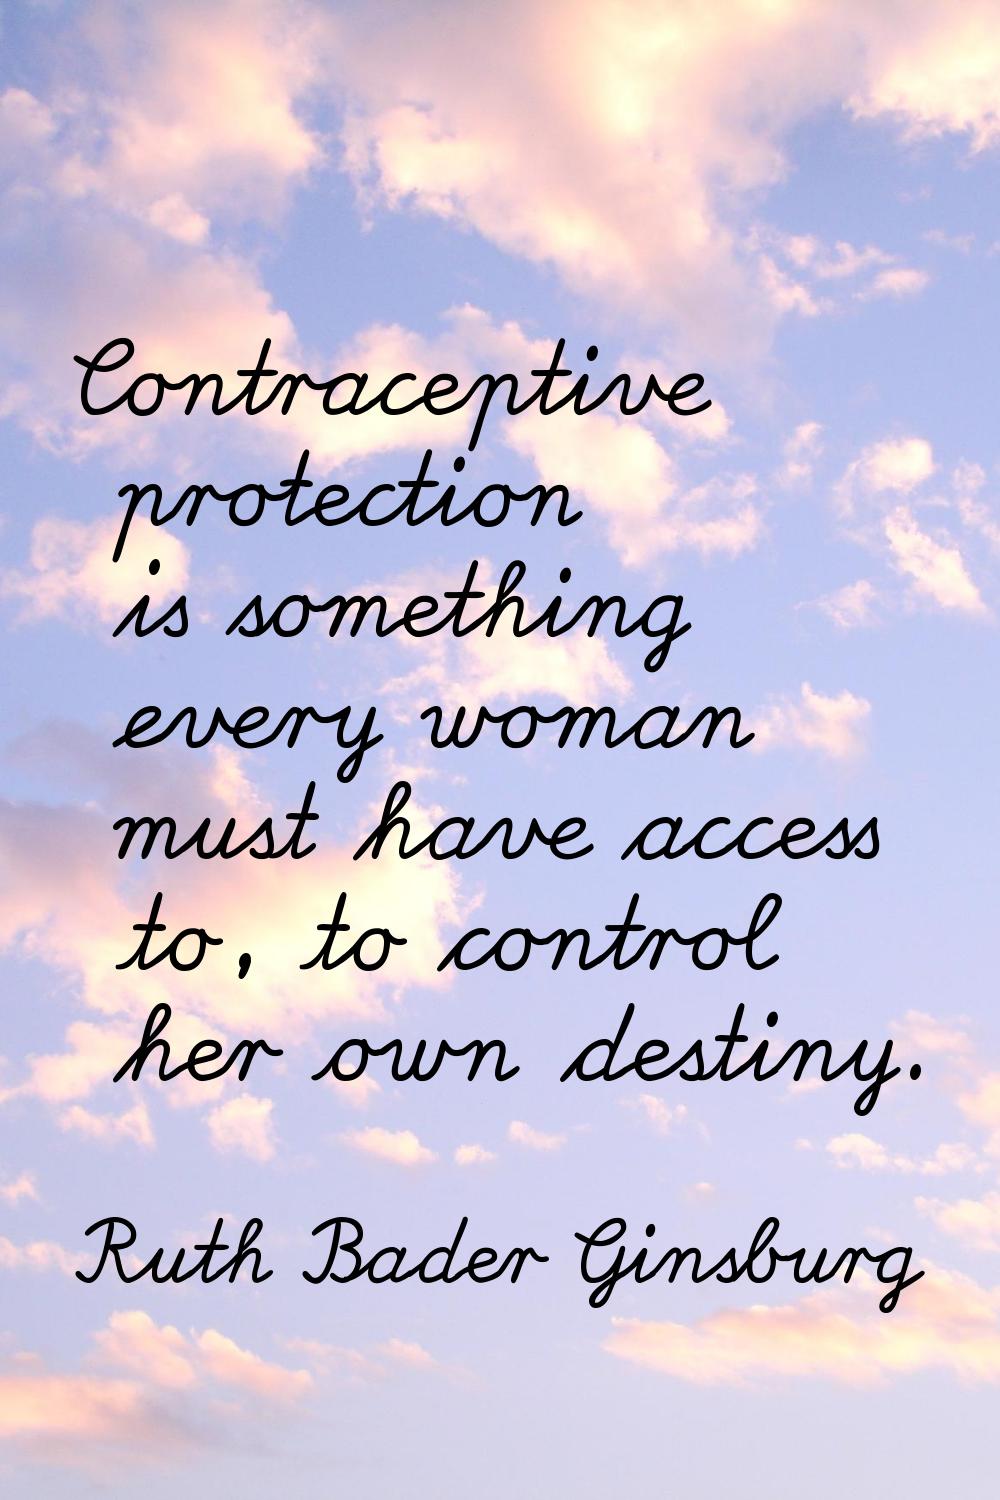 Contraceptive protection is something every woman must have access to, to control her own destiny.